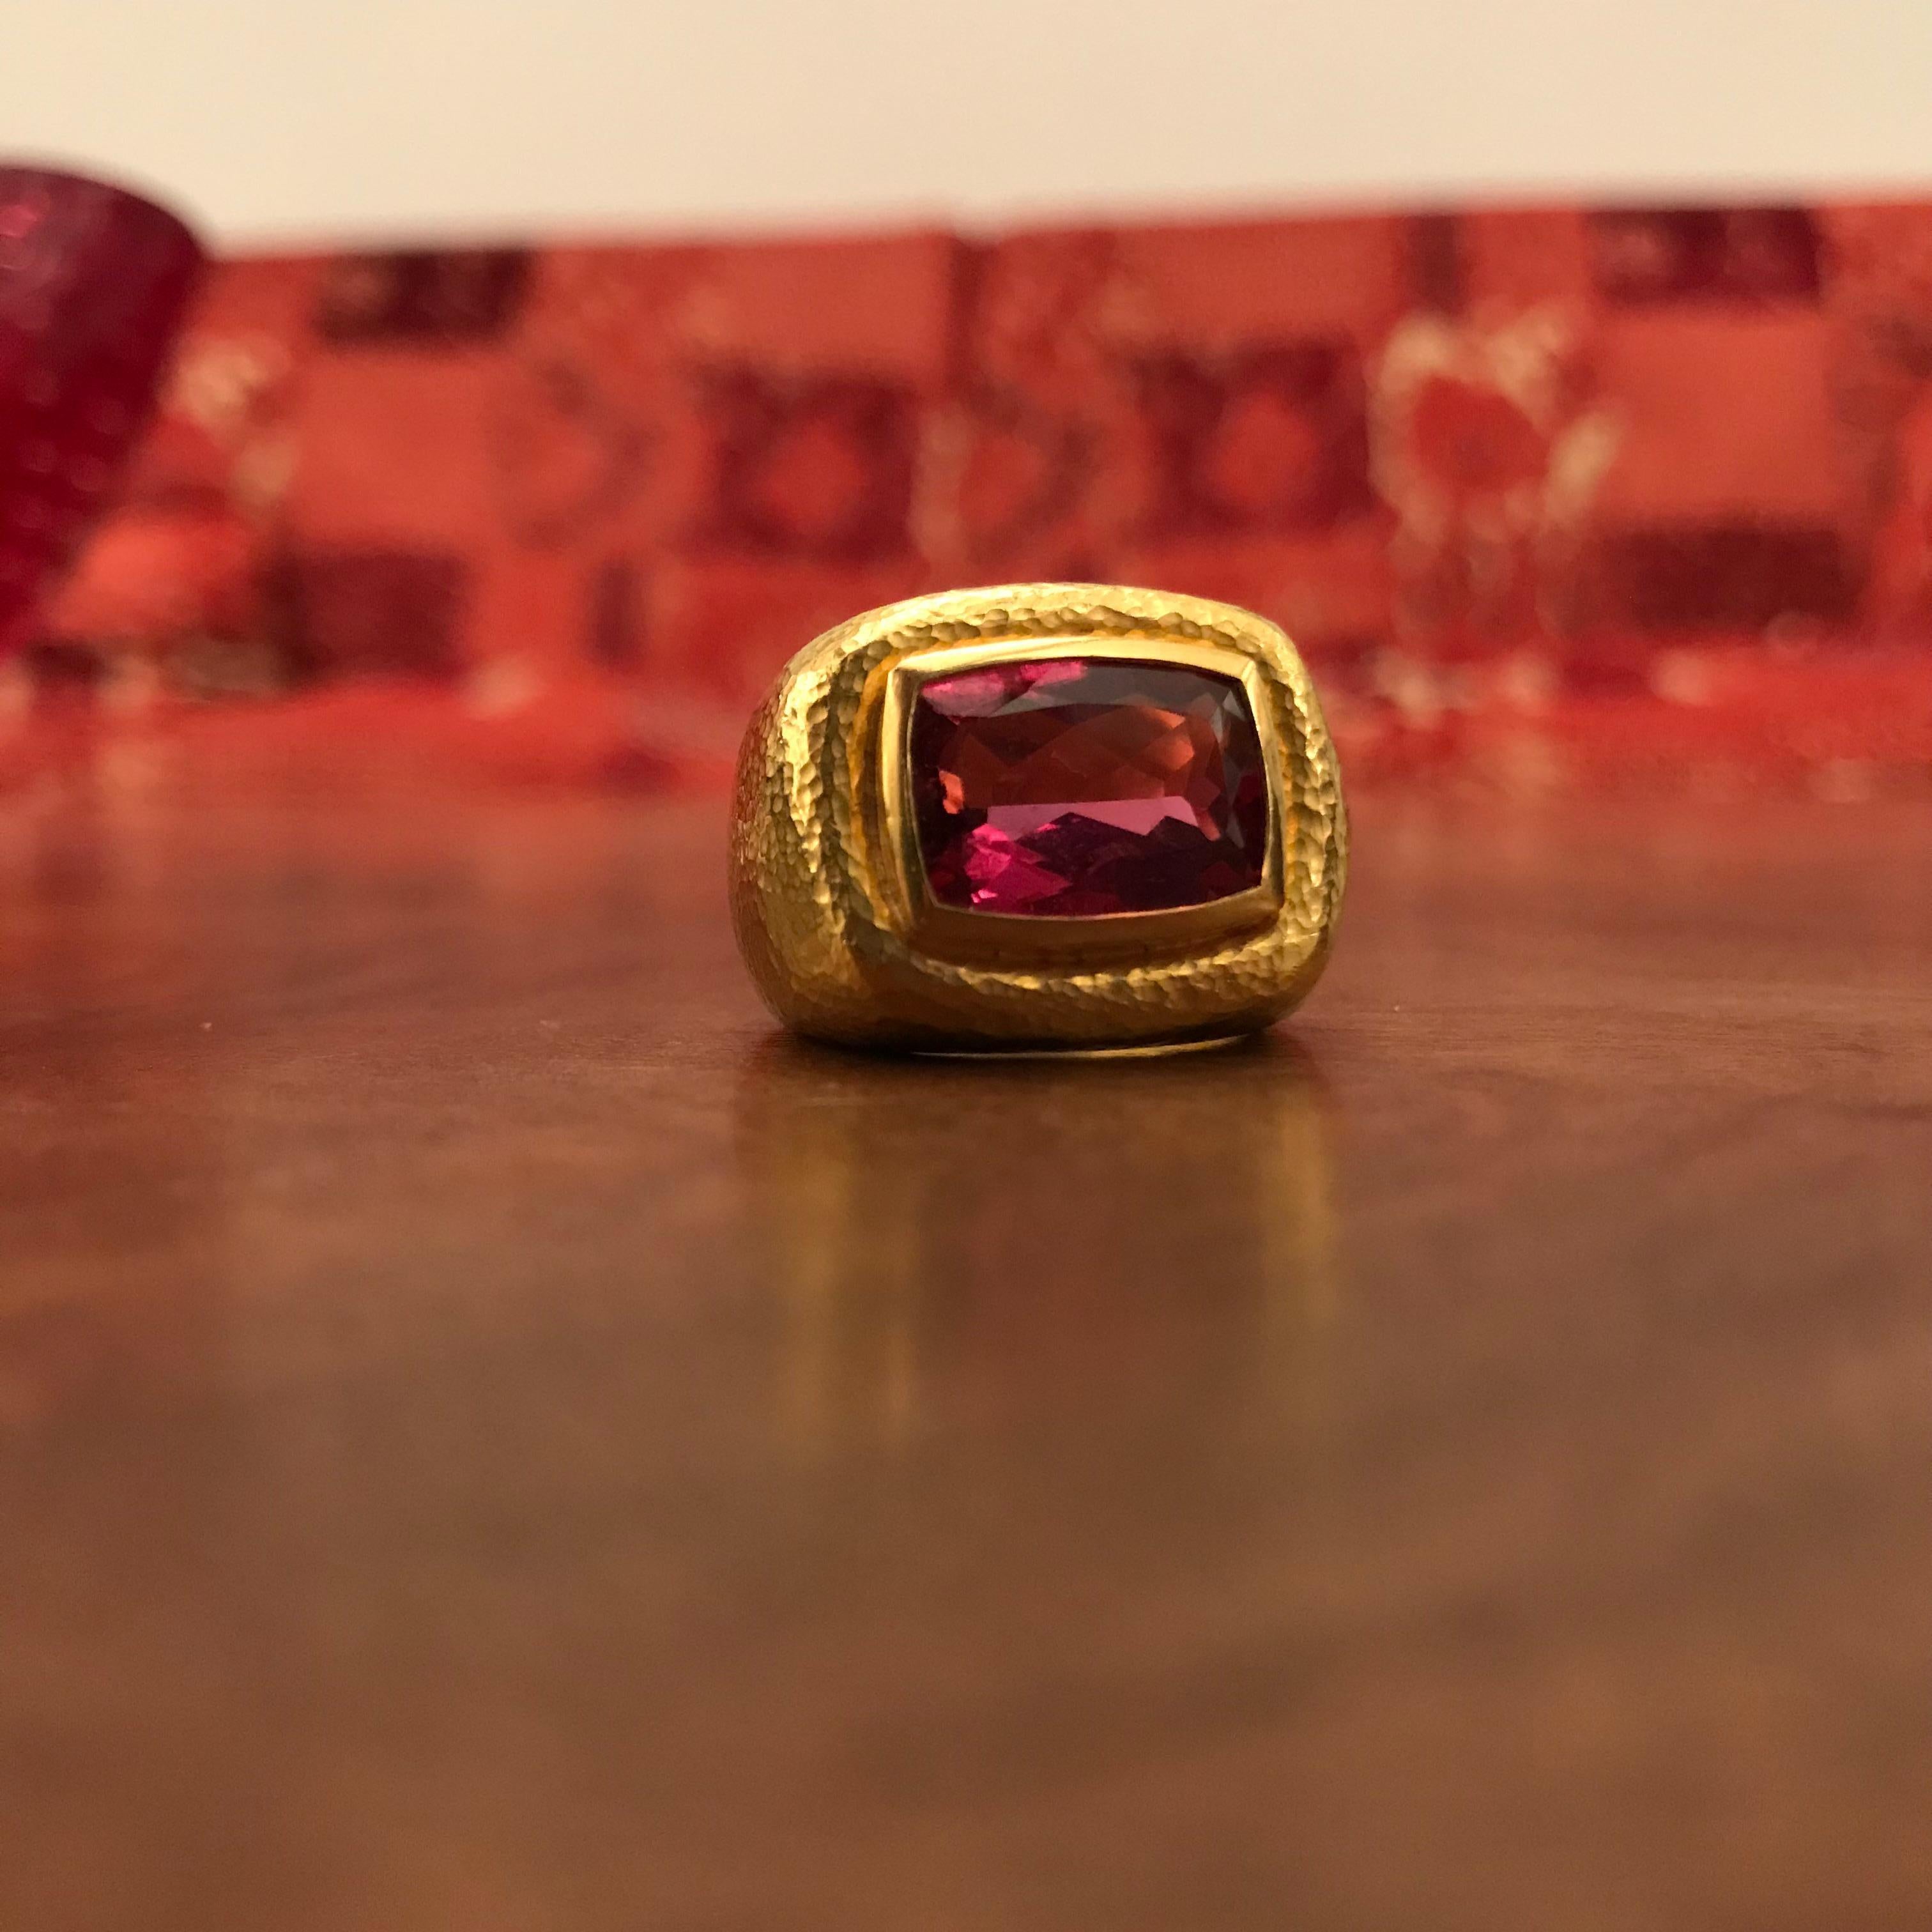 Very beautiful 22kt hammered yellow gold ring set with a 6.2 ct Rubelite. The size is 8.
Designed by Colleen B. Rosenblat